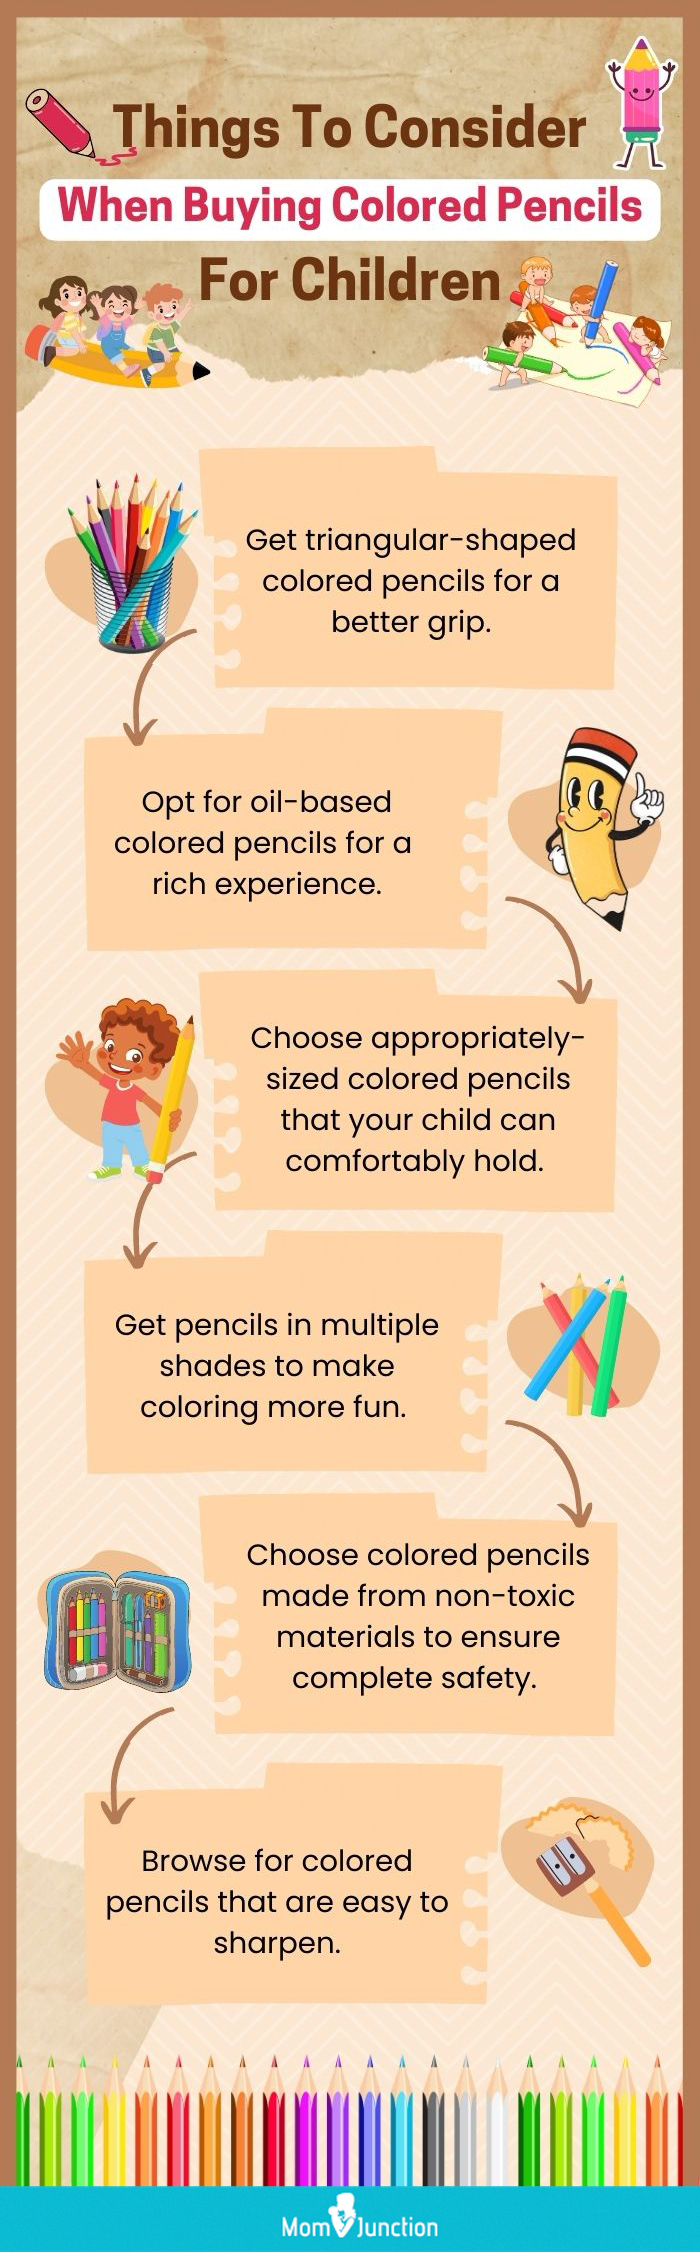 https://www.momjunction.com/wp-content/uploads/2023/01/Things-To-Consider-When-Buying-Colored-Pencils-For-Children.jpg